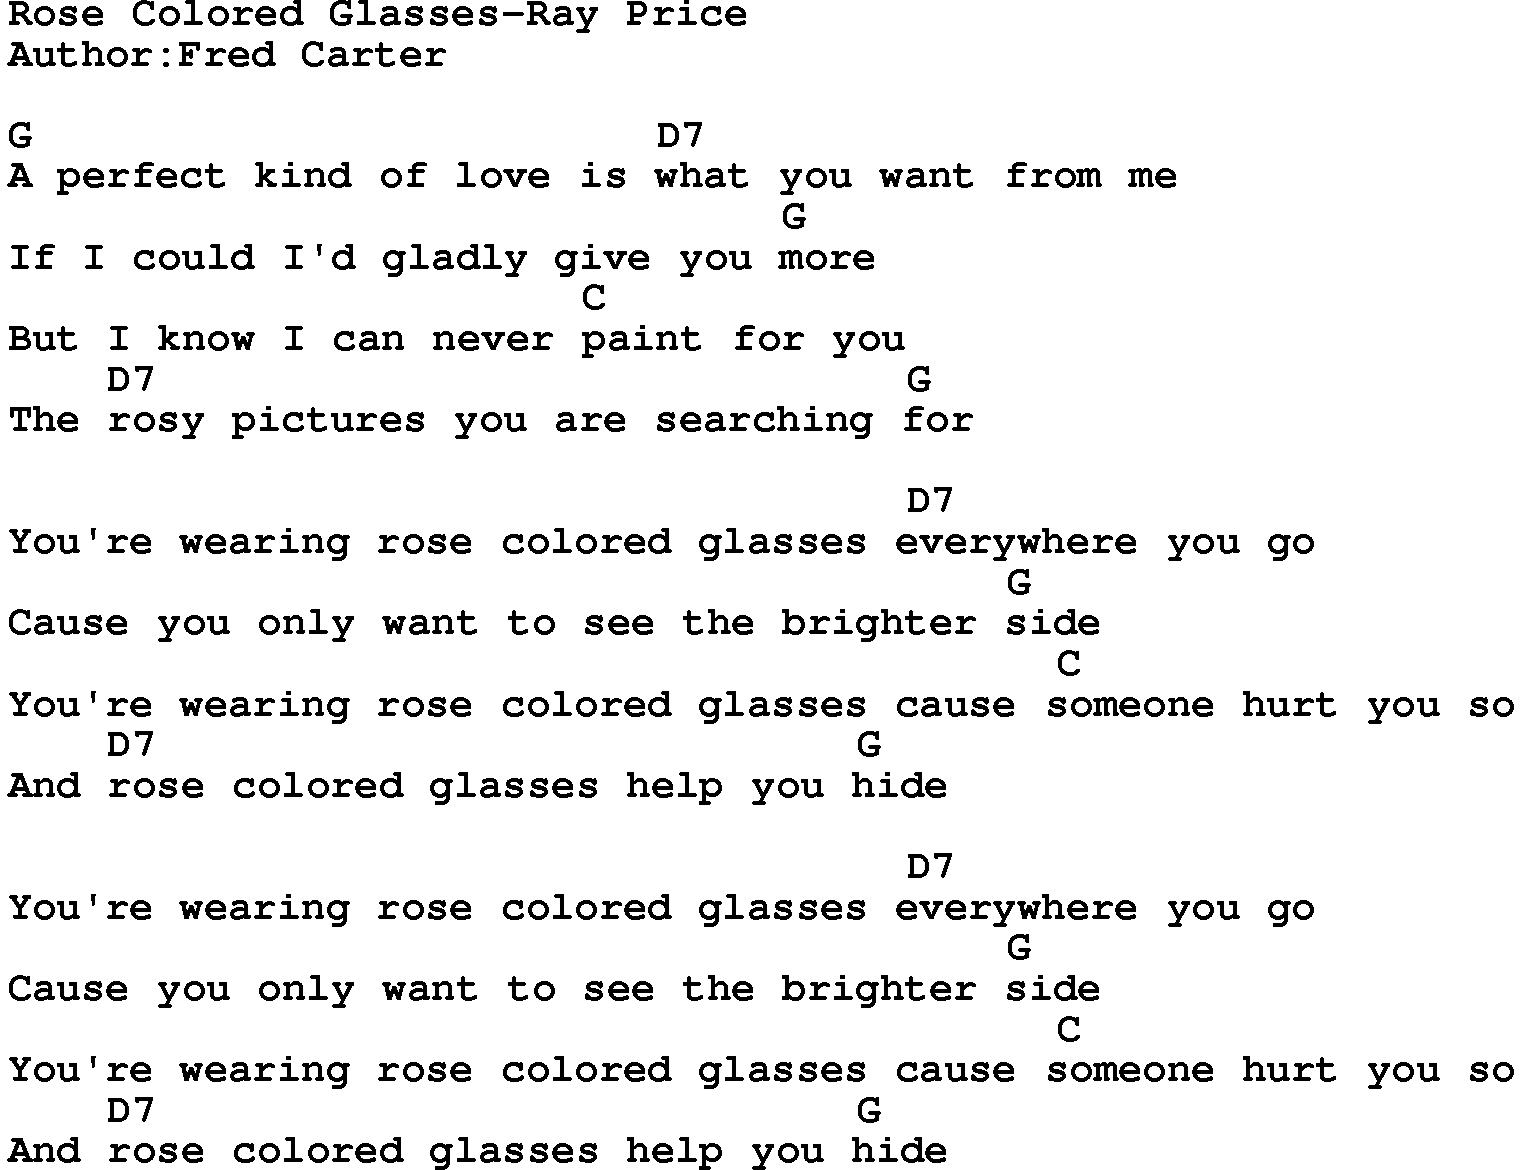 Country music song: Rose Colored Glasses-Ray Price lyrics and chords